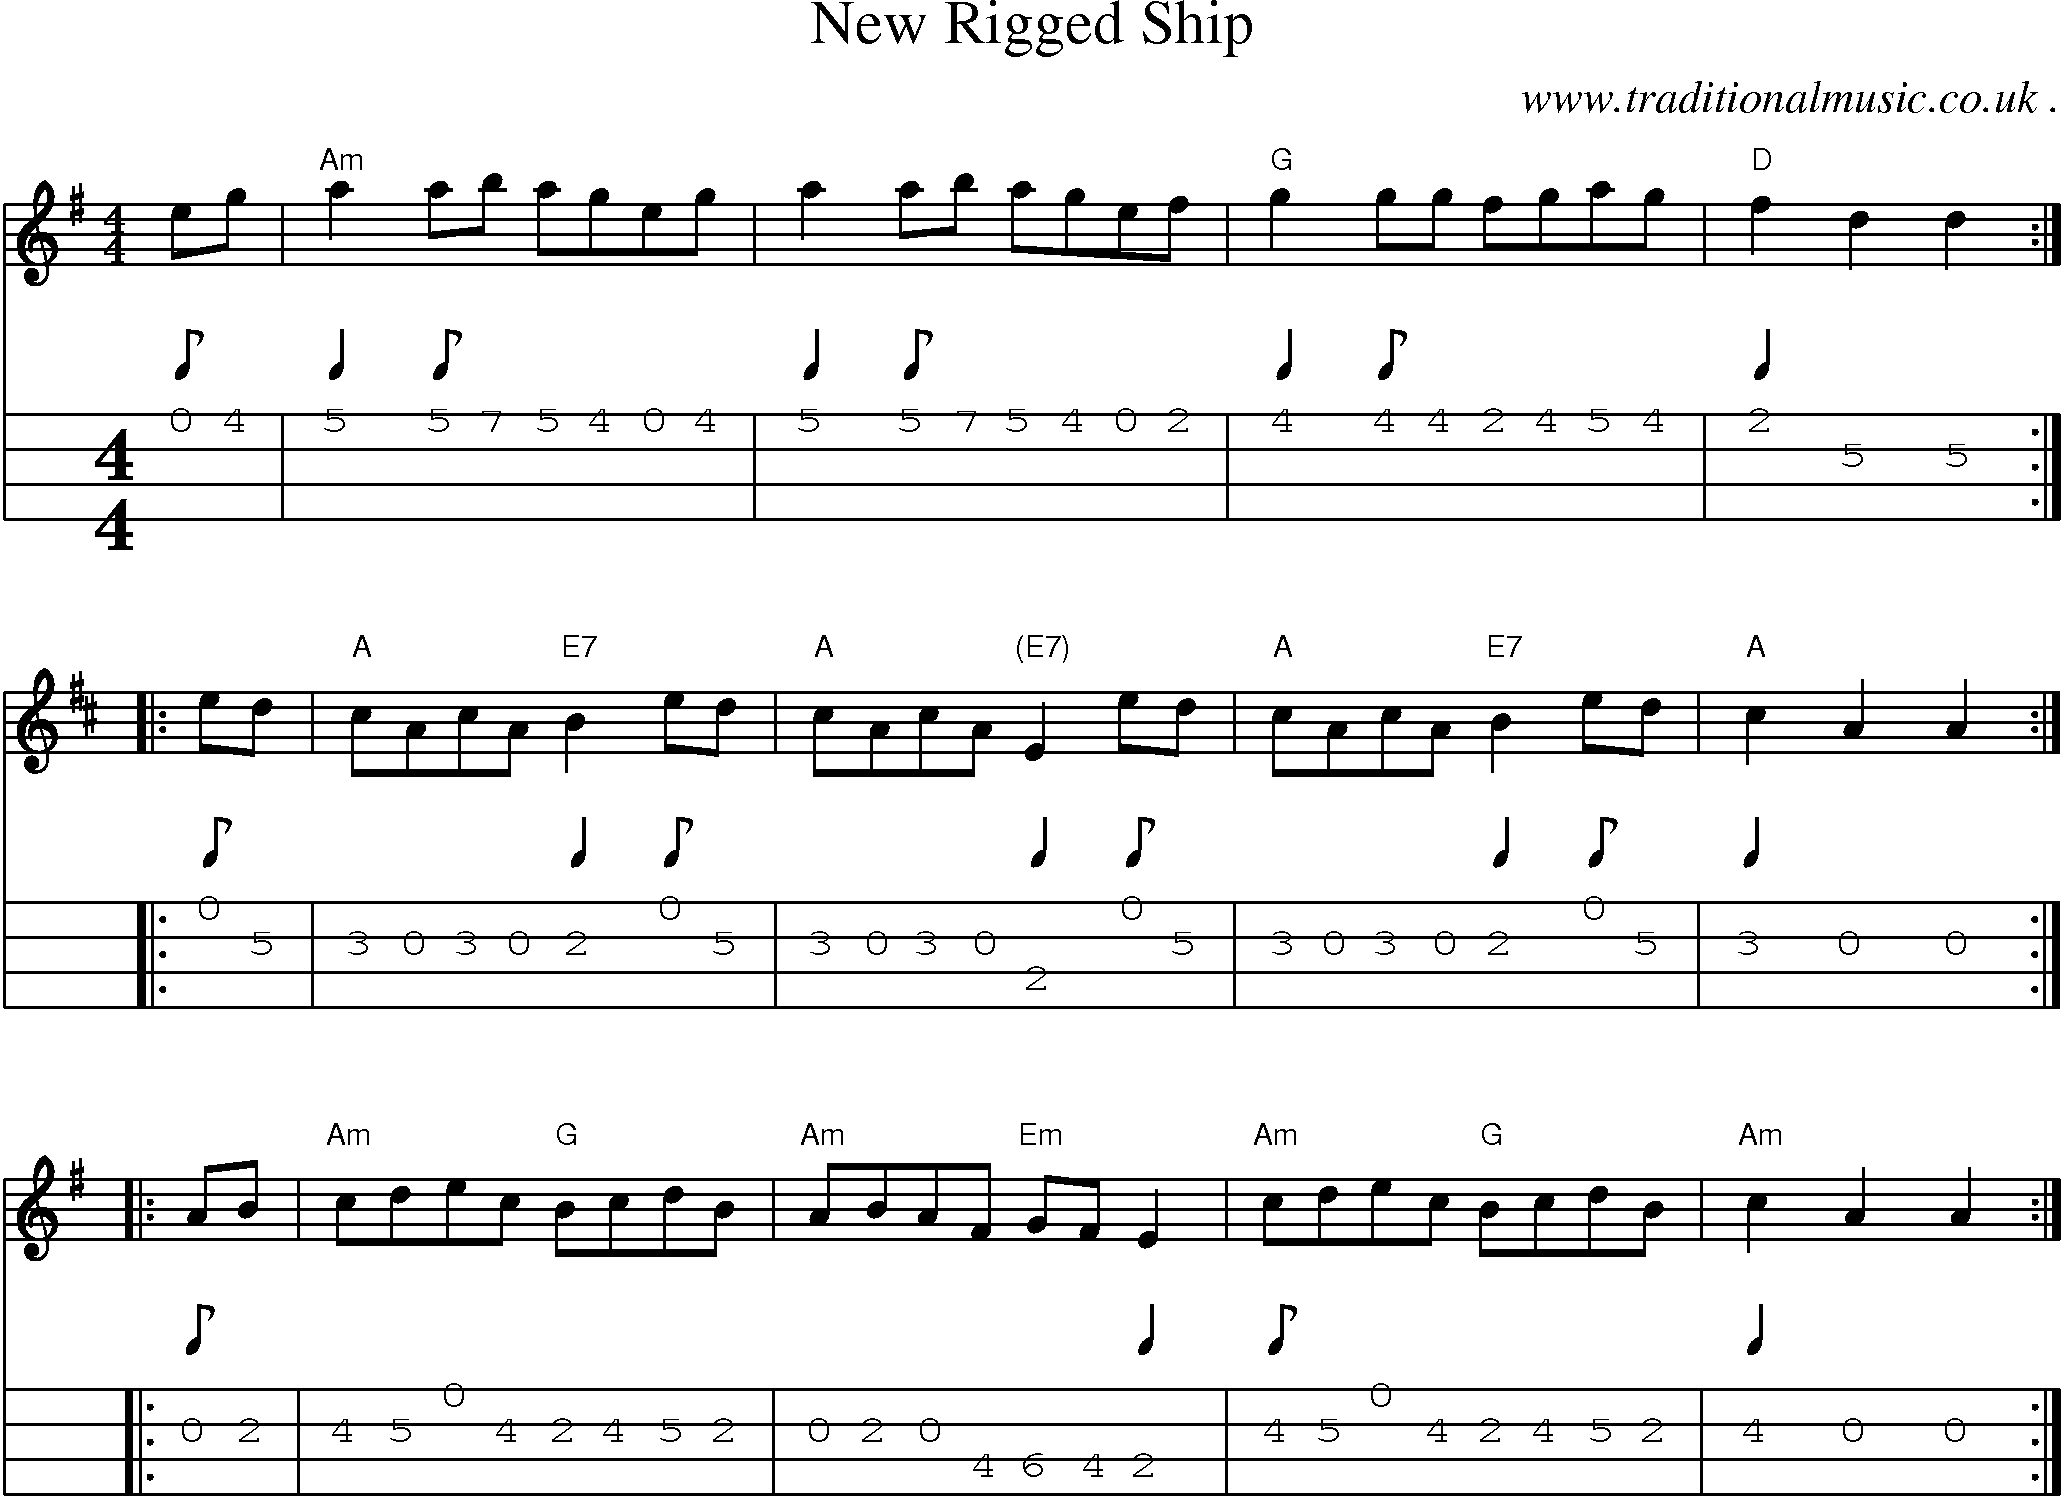 Music Score and Guitar Tabs for New Rigged Ship